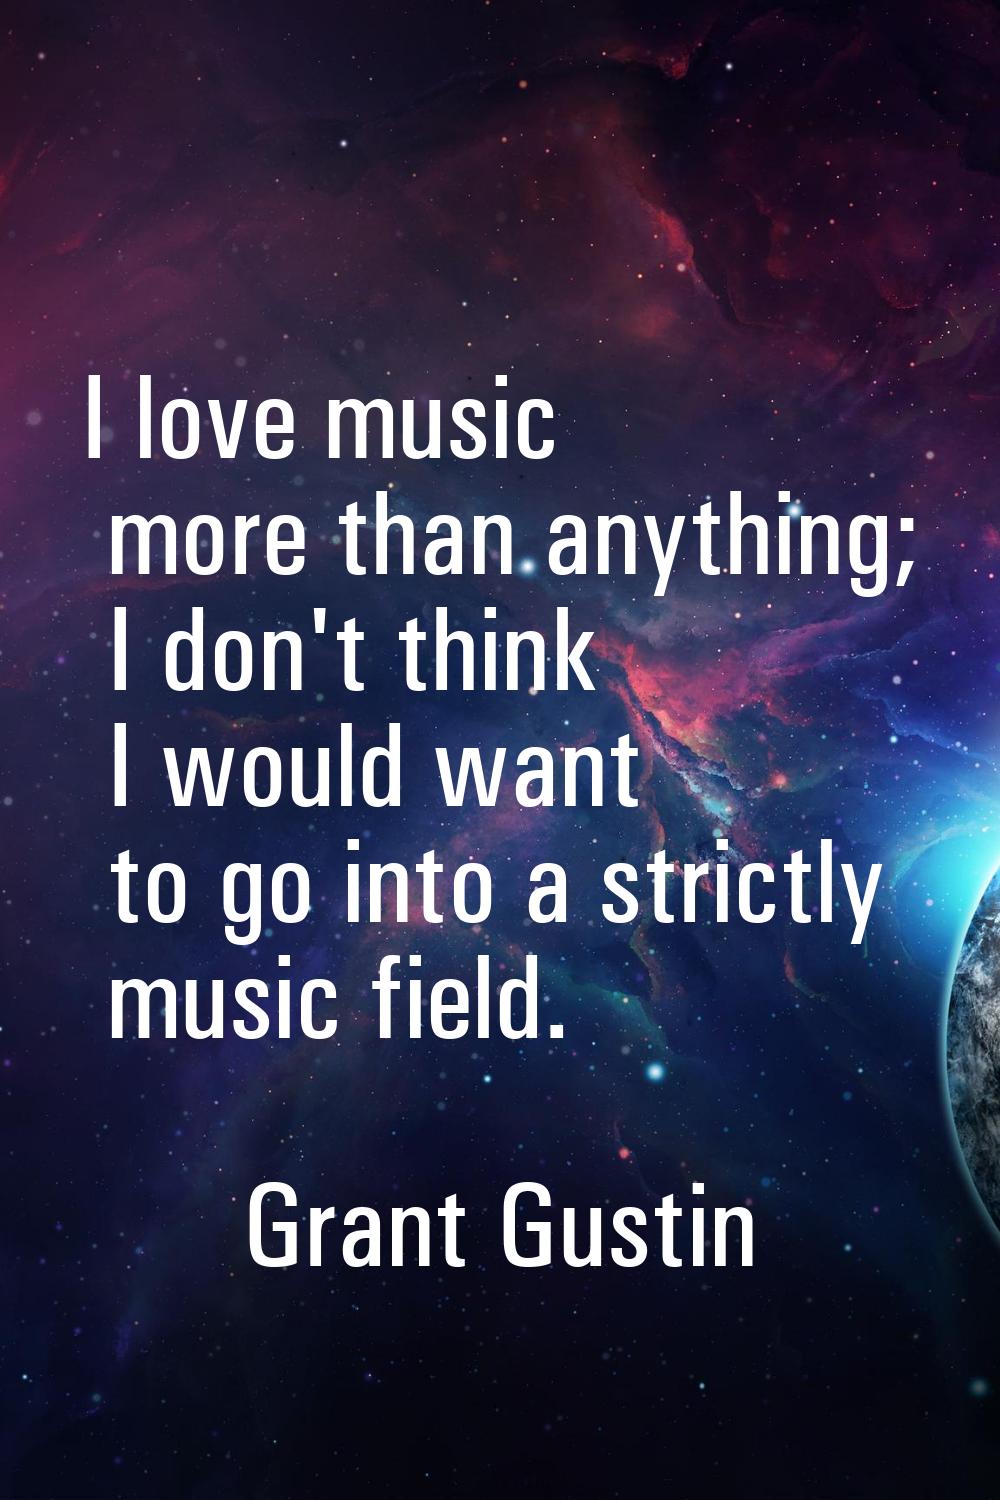 I love music more than anything; I don't think I would want to go into a strictly music field.